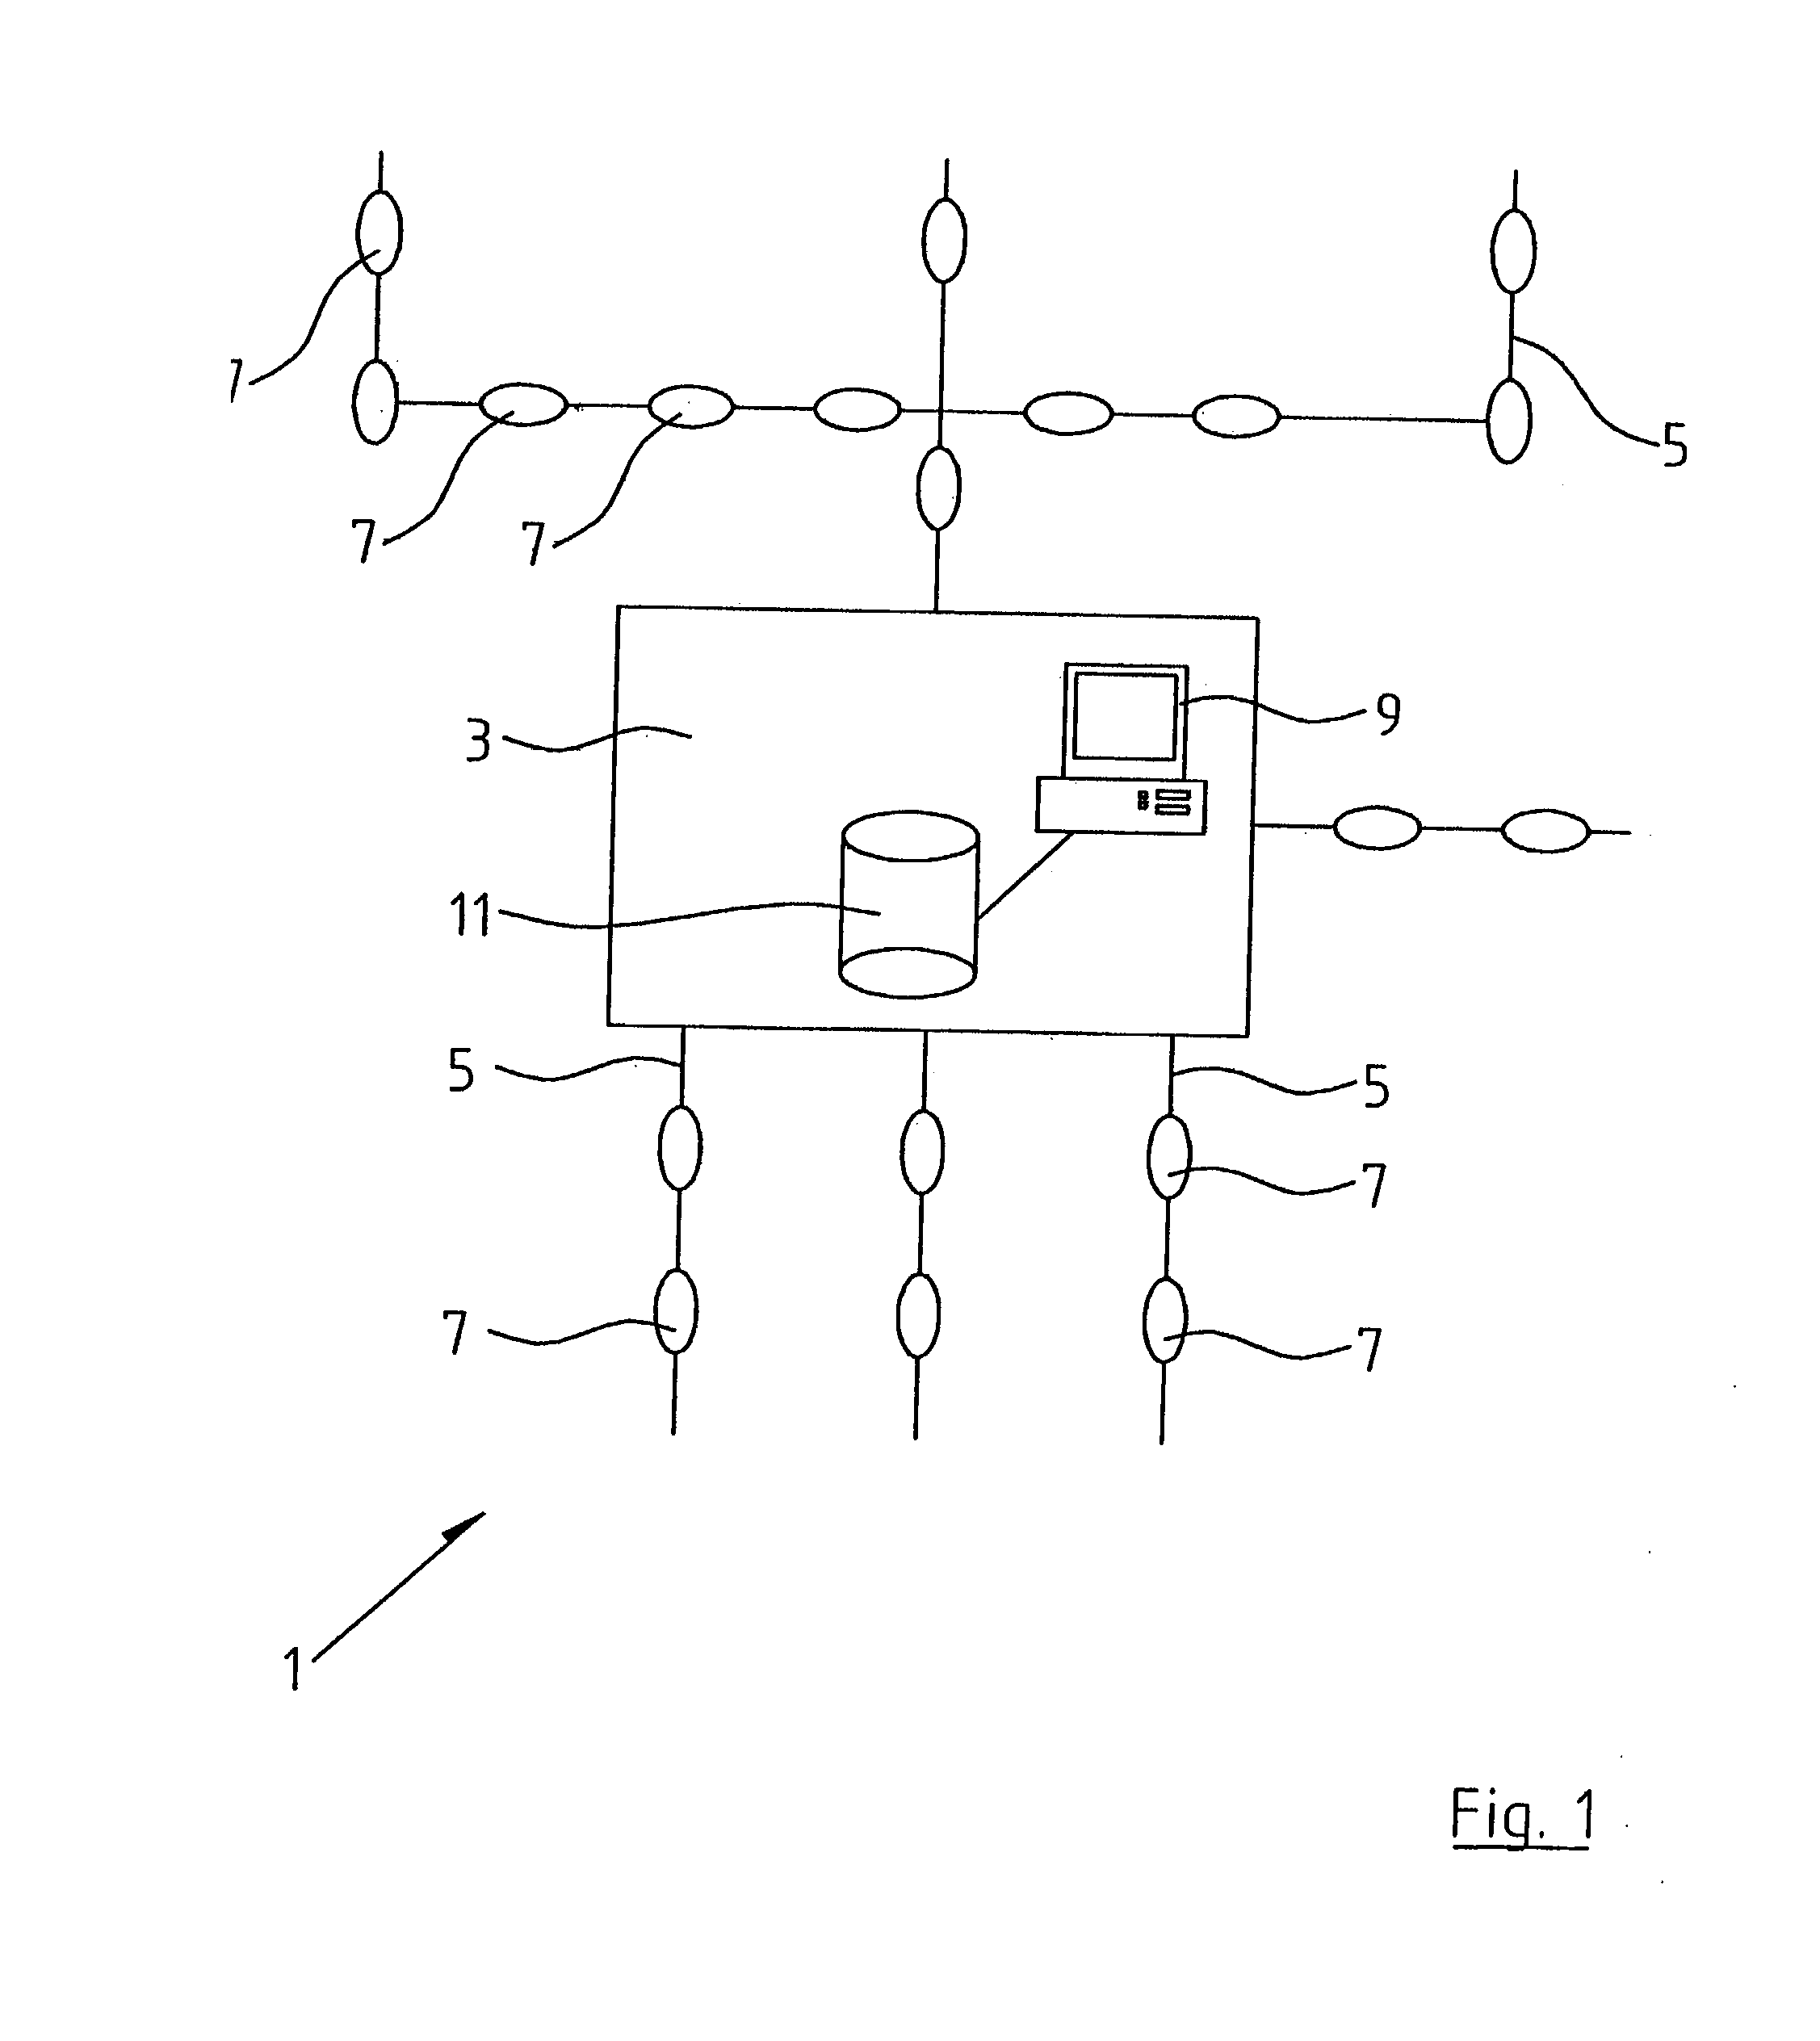 Method of Monitoring Line Faults in a Medium Voltage Network